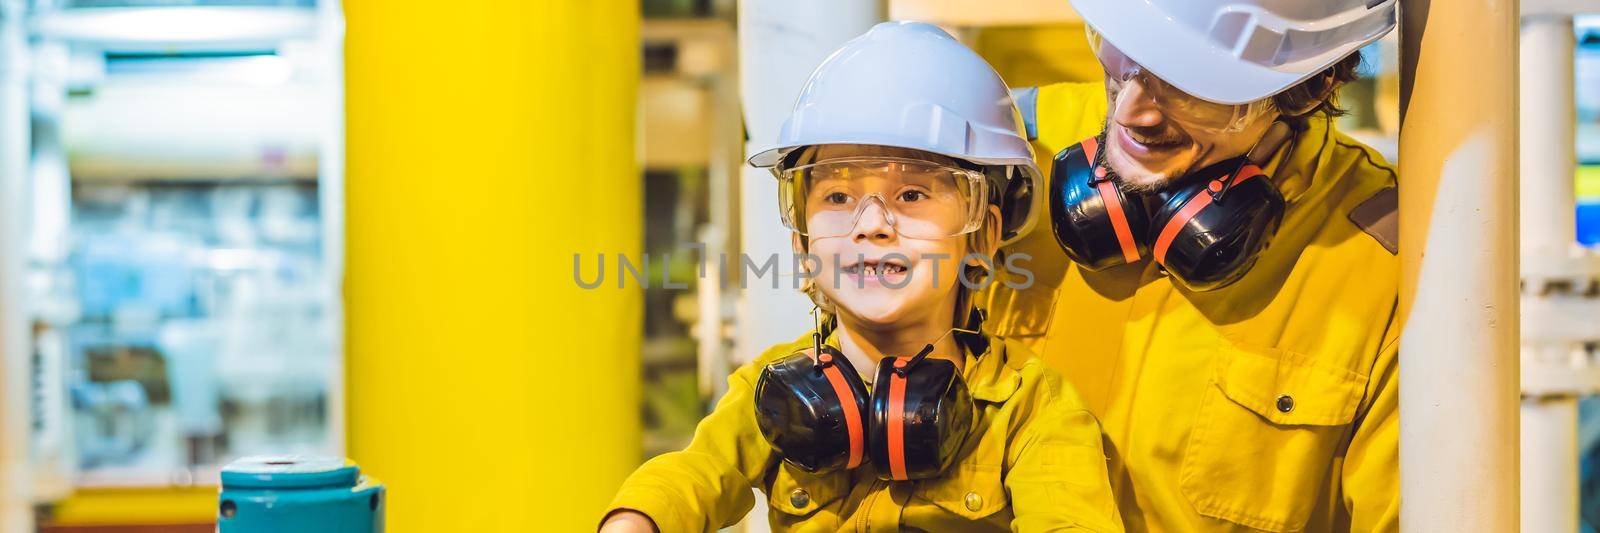 BANNER, LONG FORMAT Young man and a little boy are both in a yellow work uniform, glasses, and helmet in an industrial environment, oil Platform or liquefied gas plant by galitskaya